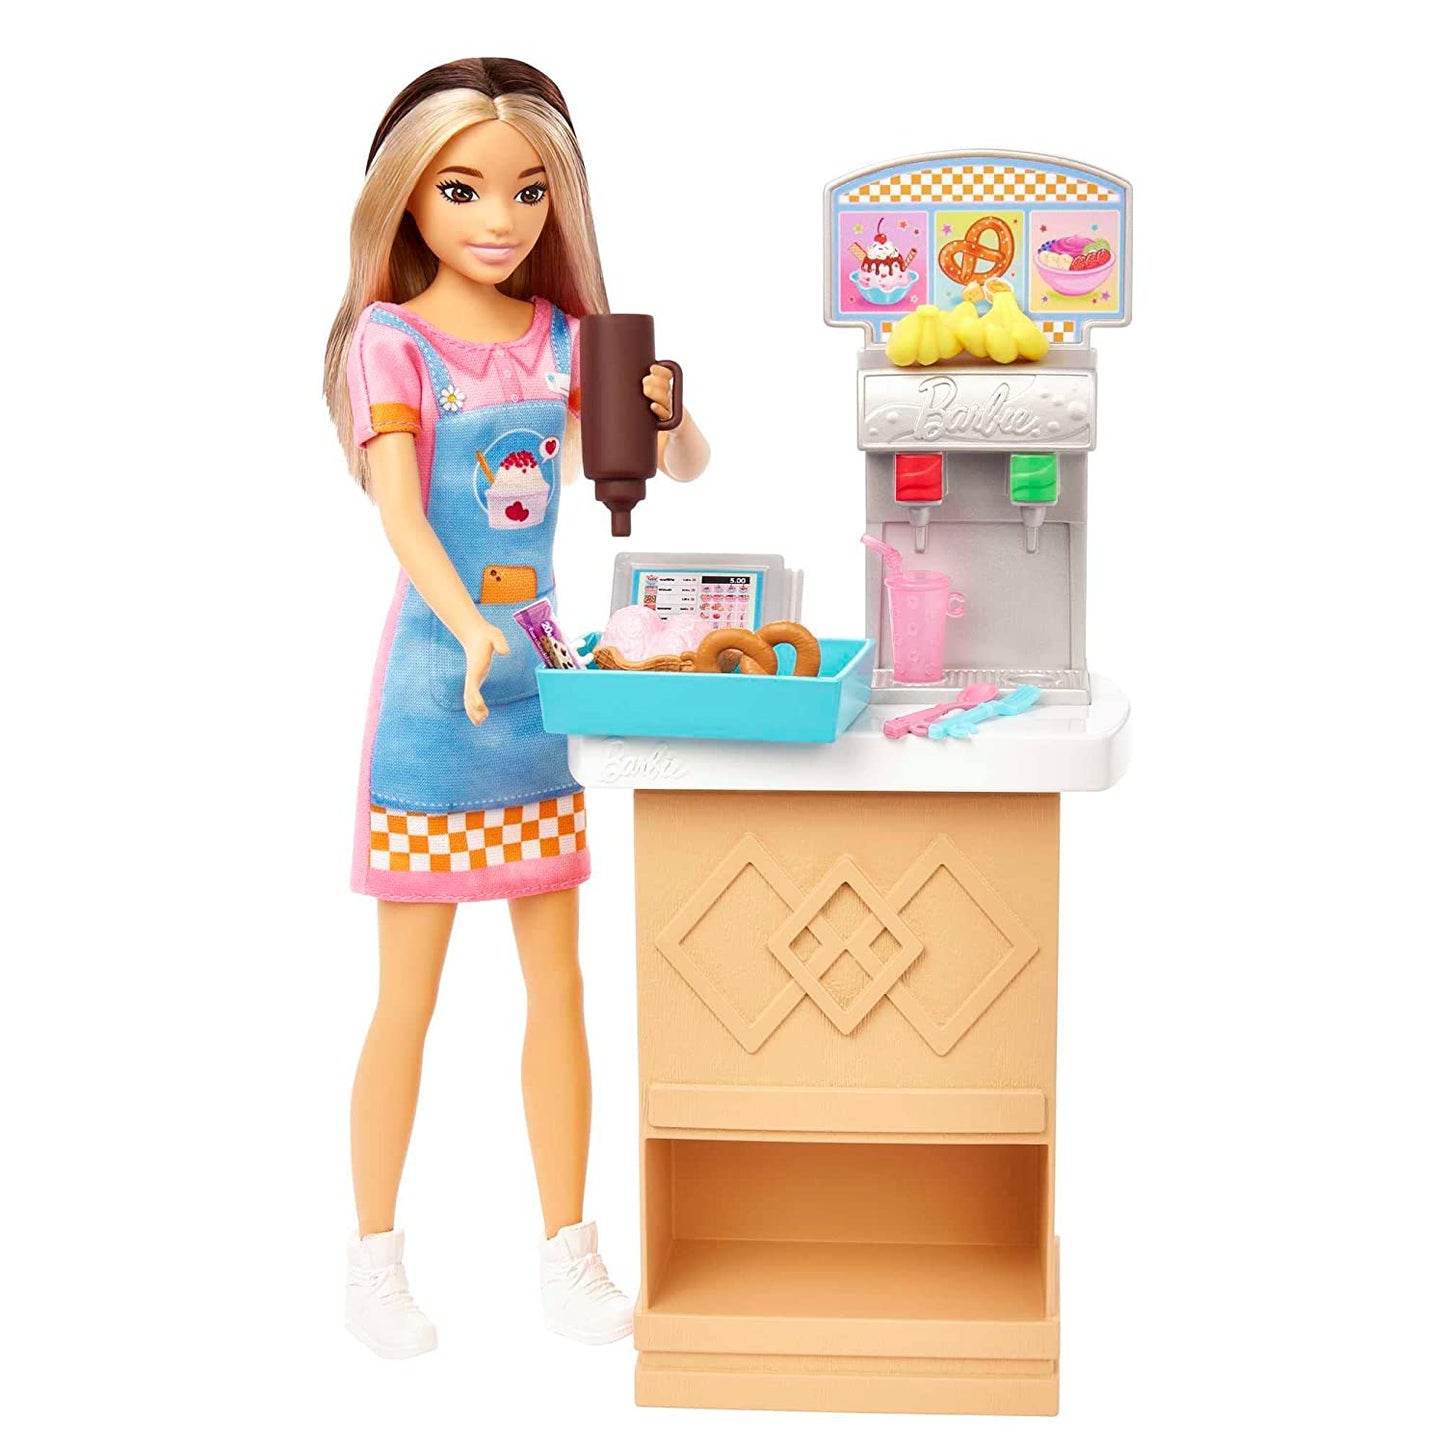 Barbie Toys Skipper Doll and Snack Bar With Bill Counter Playset: Color-Change Sundae, 8 Accessories Best Gift For 3+Year GirlsFirst Jobs Edition